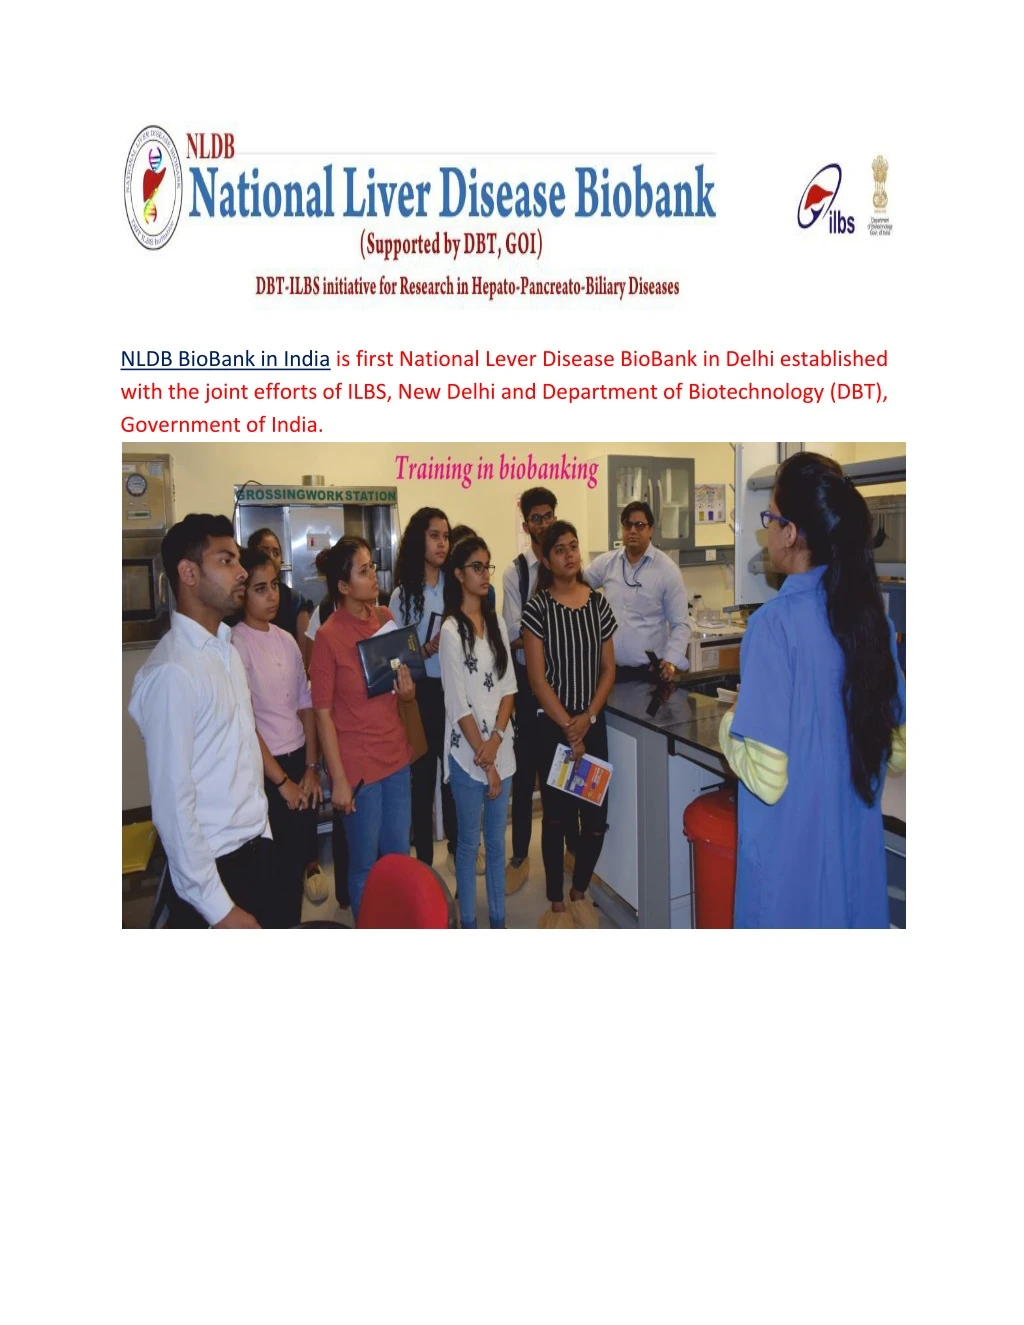 nldb biobank in india is first national lever